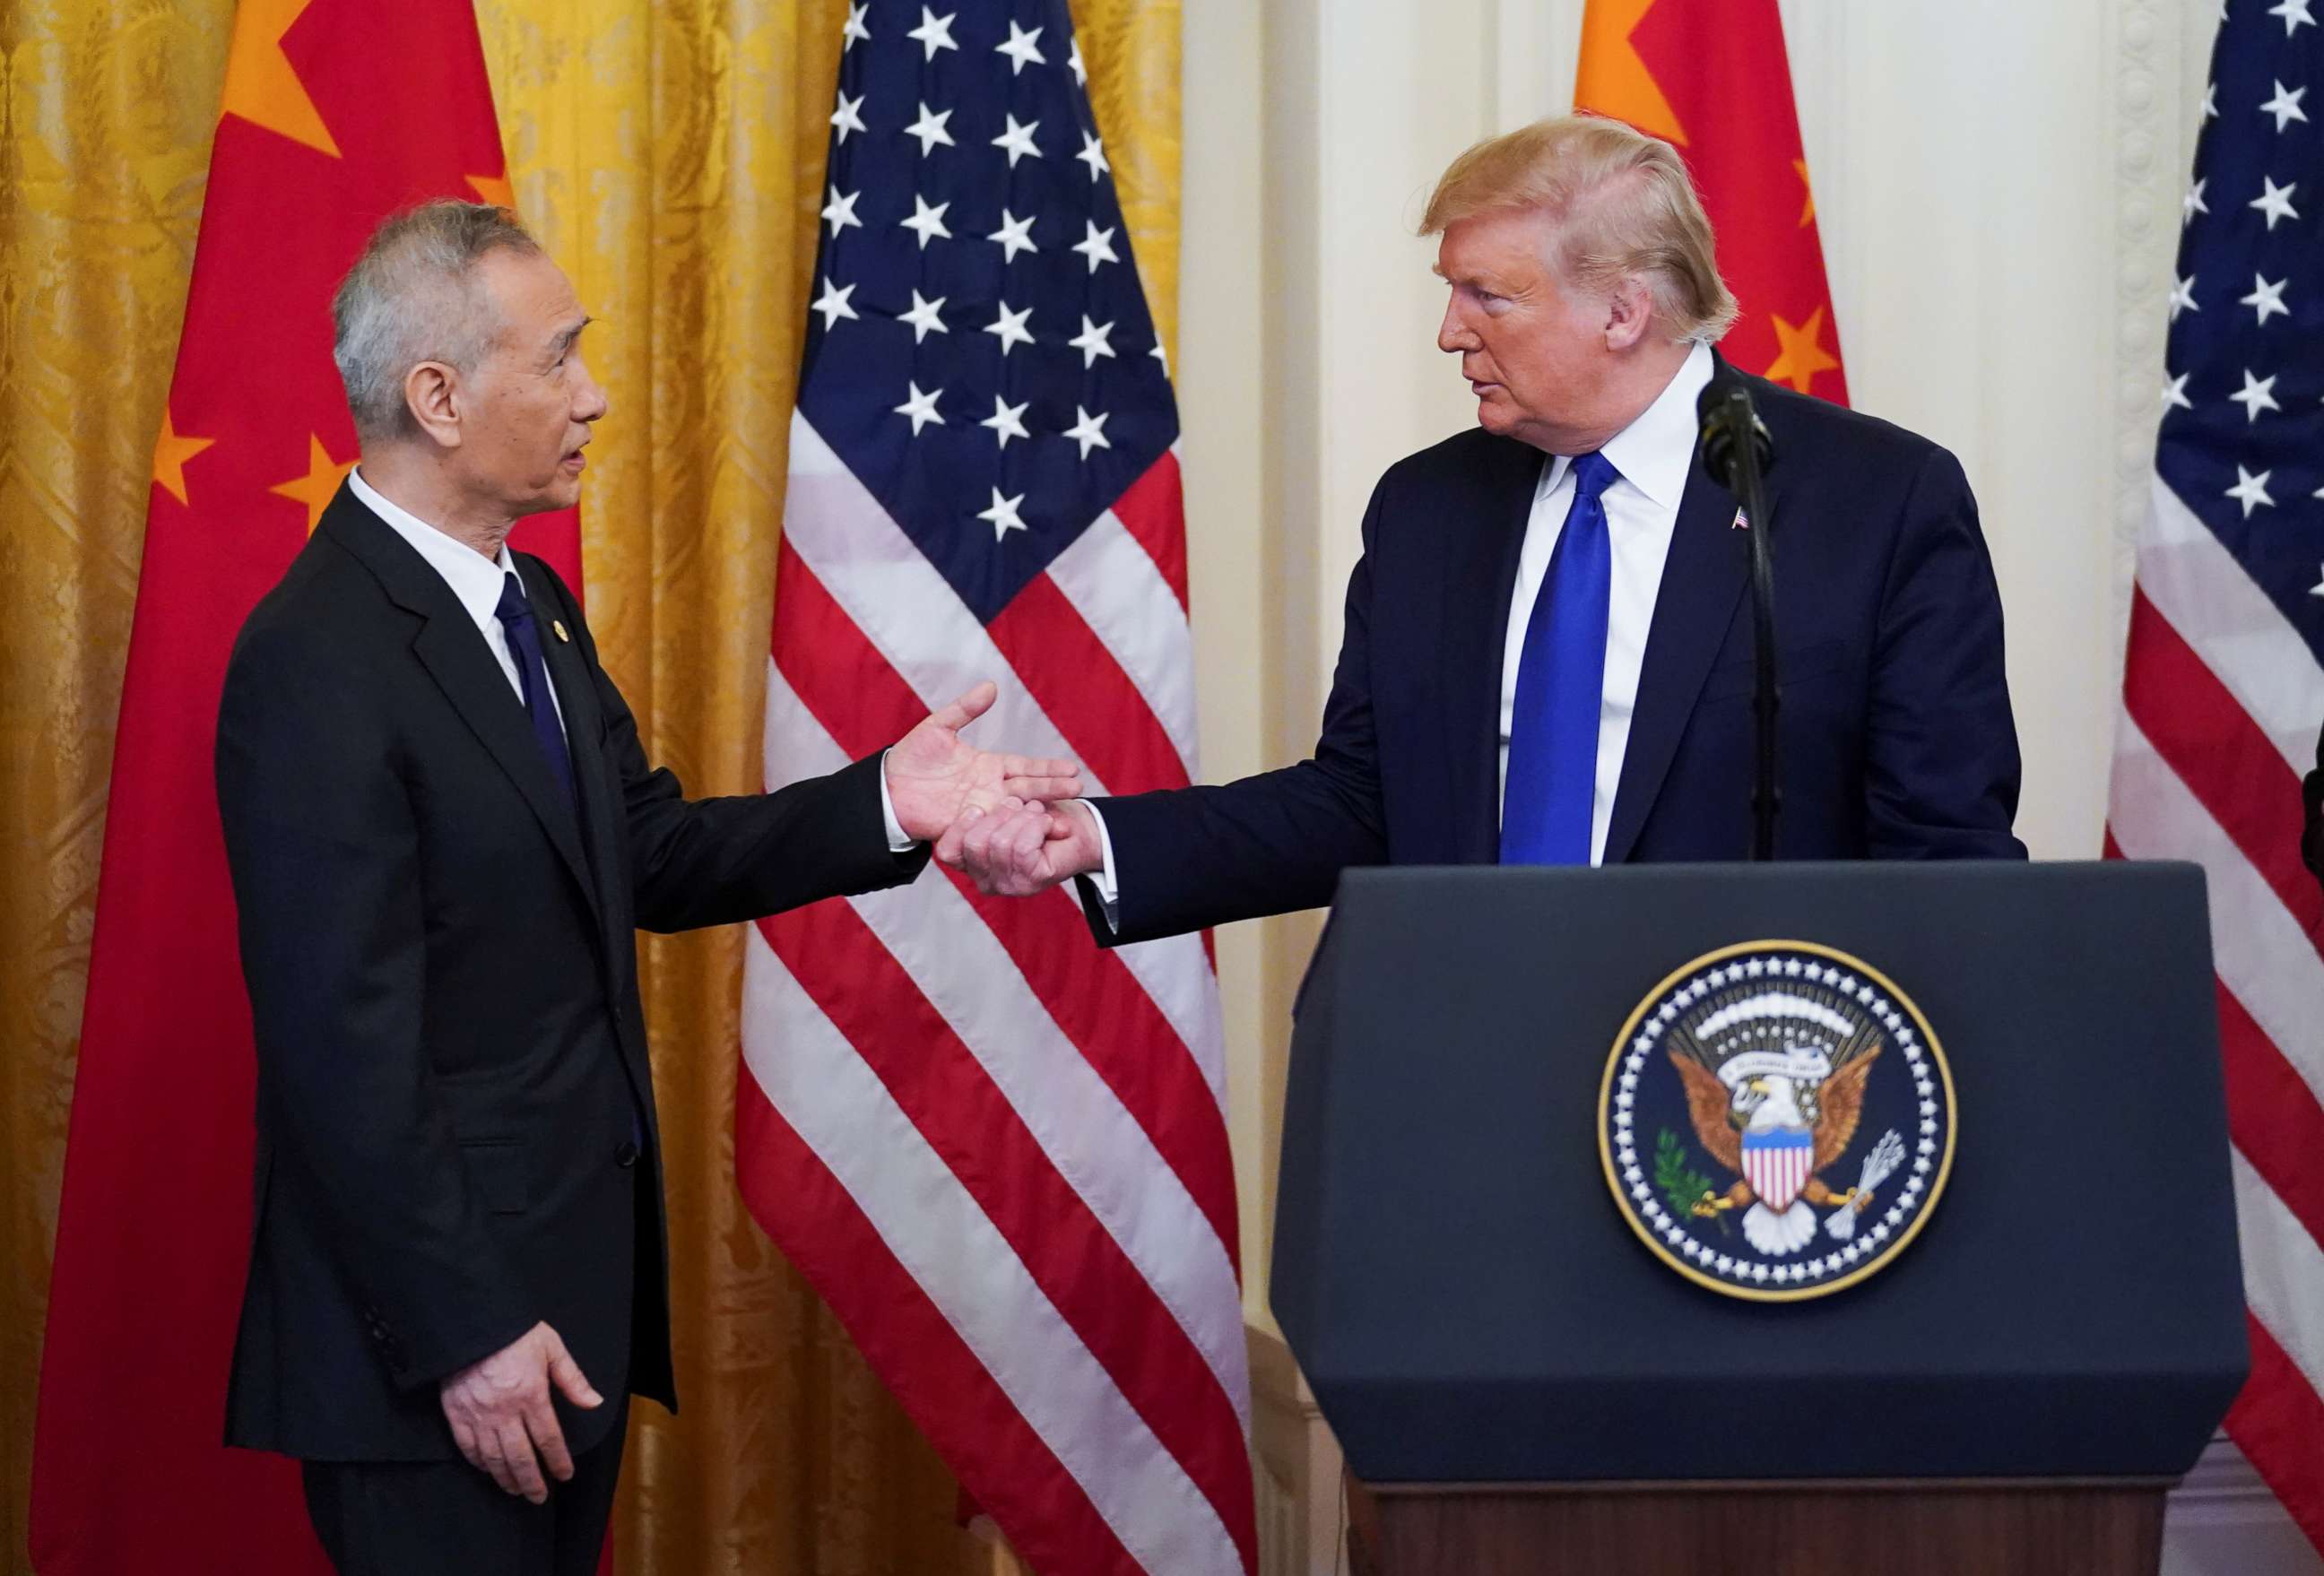 PHOTO: Chinese Vice Premier Liu He reaches out to President Donald Trump as he approaches the podium to speak during a signing ceremony for "phase one" of the U.S.-China trade agreement in the East Room of the White House in Washington, Jan. 15, 2020.